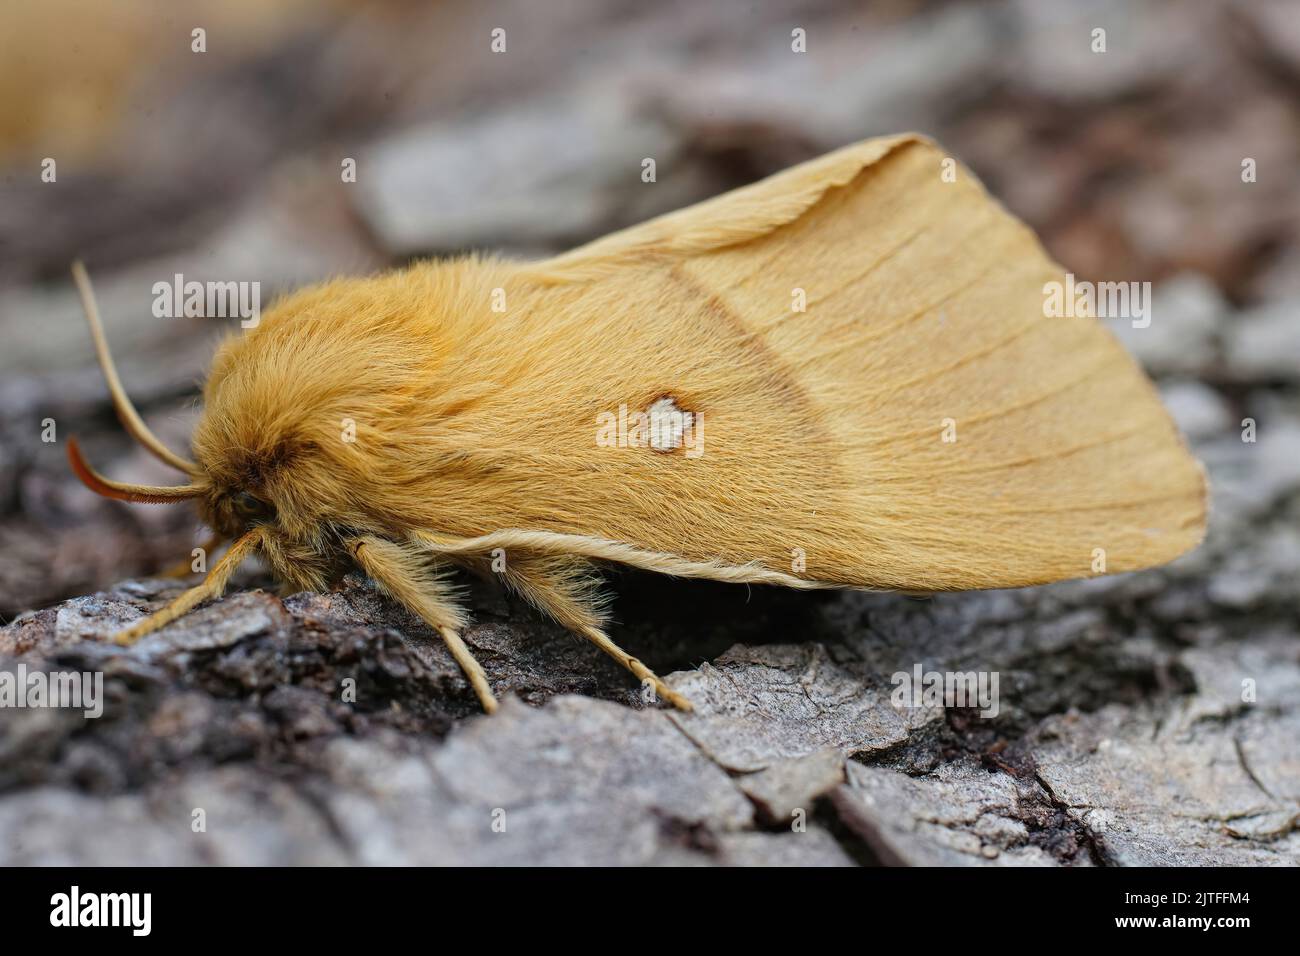 Detailed closeup on the lighbrown Oak Eggar moth, Lasiocampa quercus, sitting on wood in the garden Stock Photo